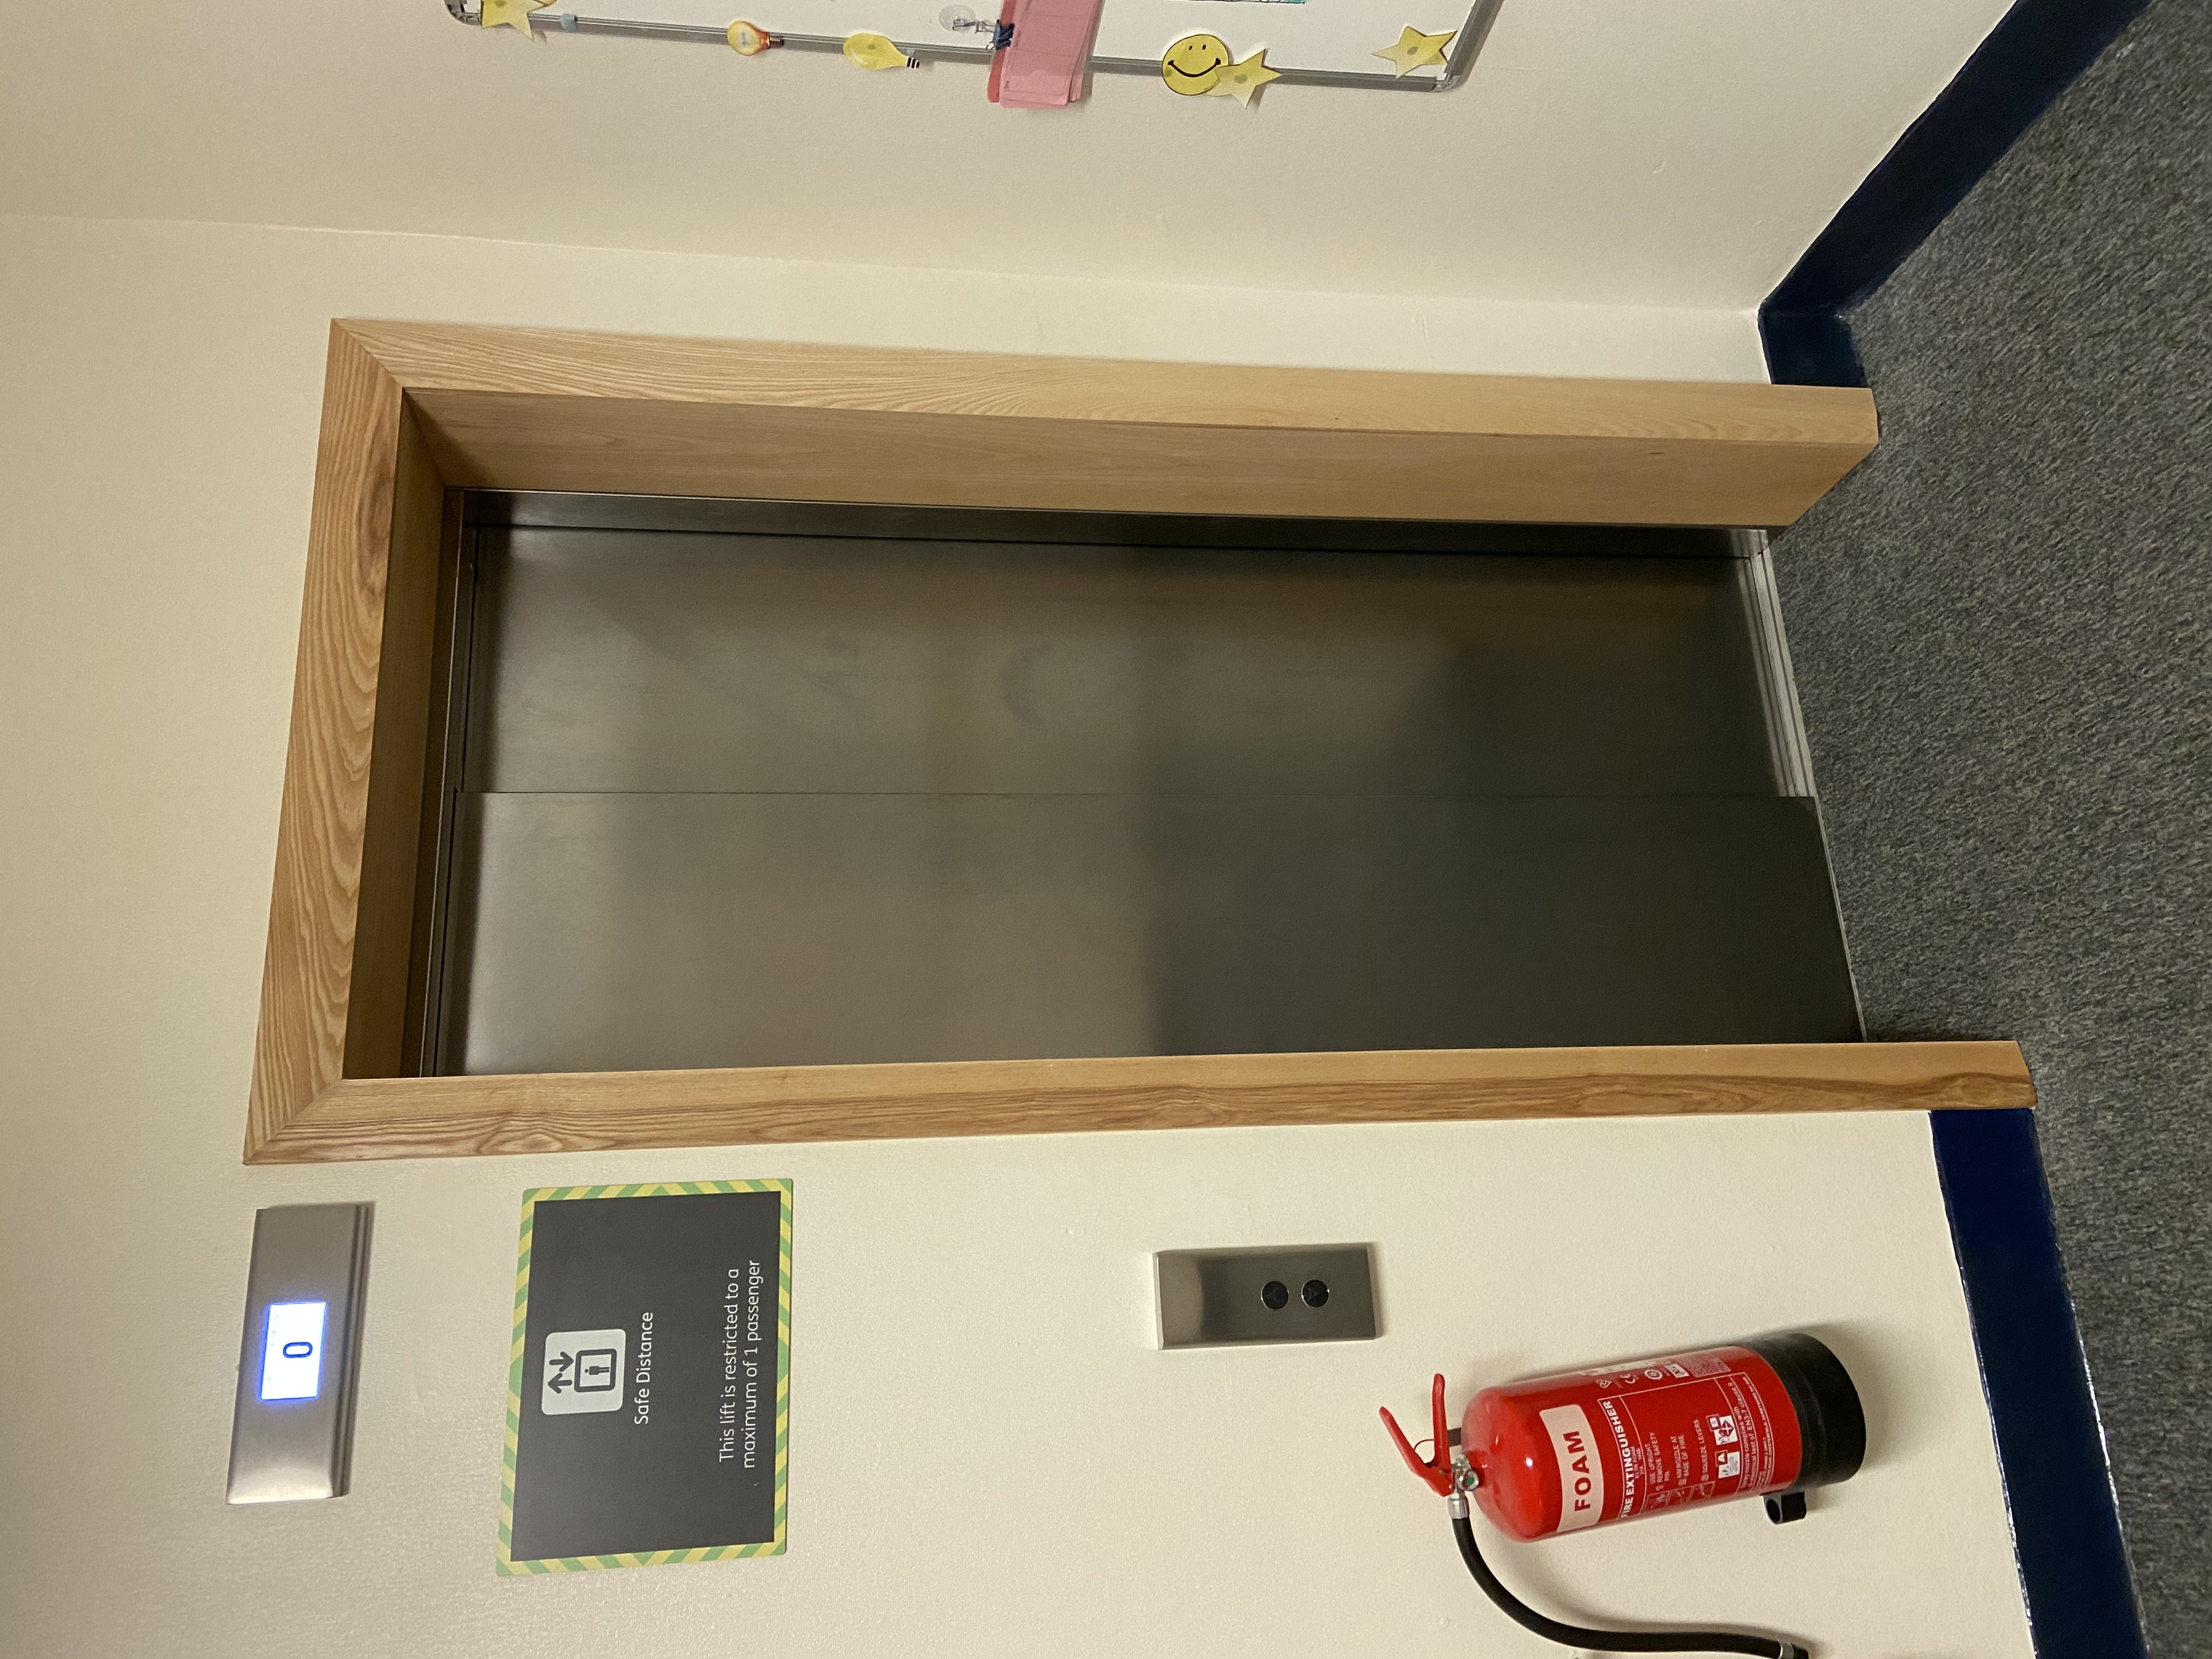 Lift joinery as part of the full turnkey lift solution service at PRNS building services for the lift and escalator industry